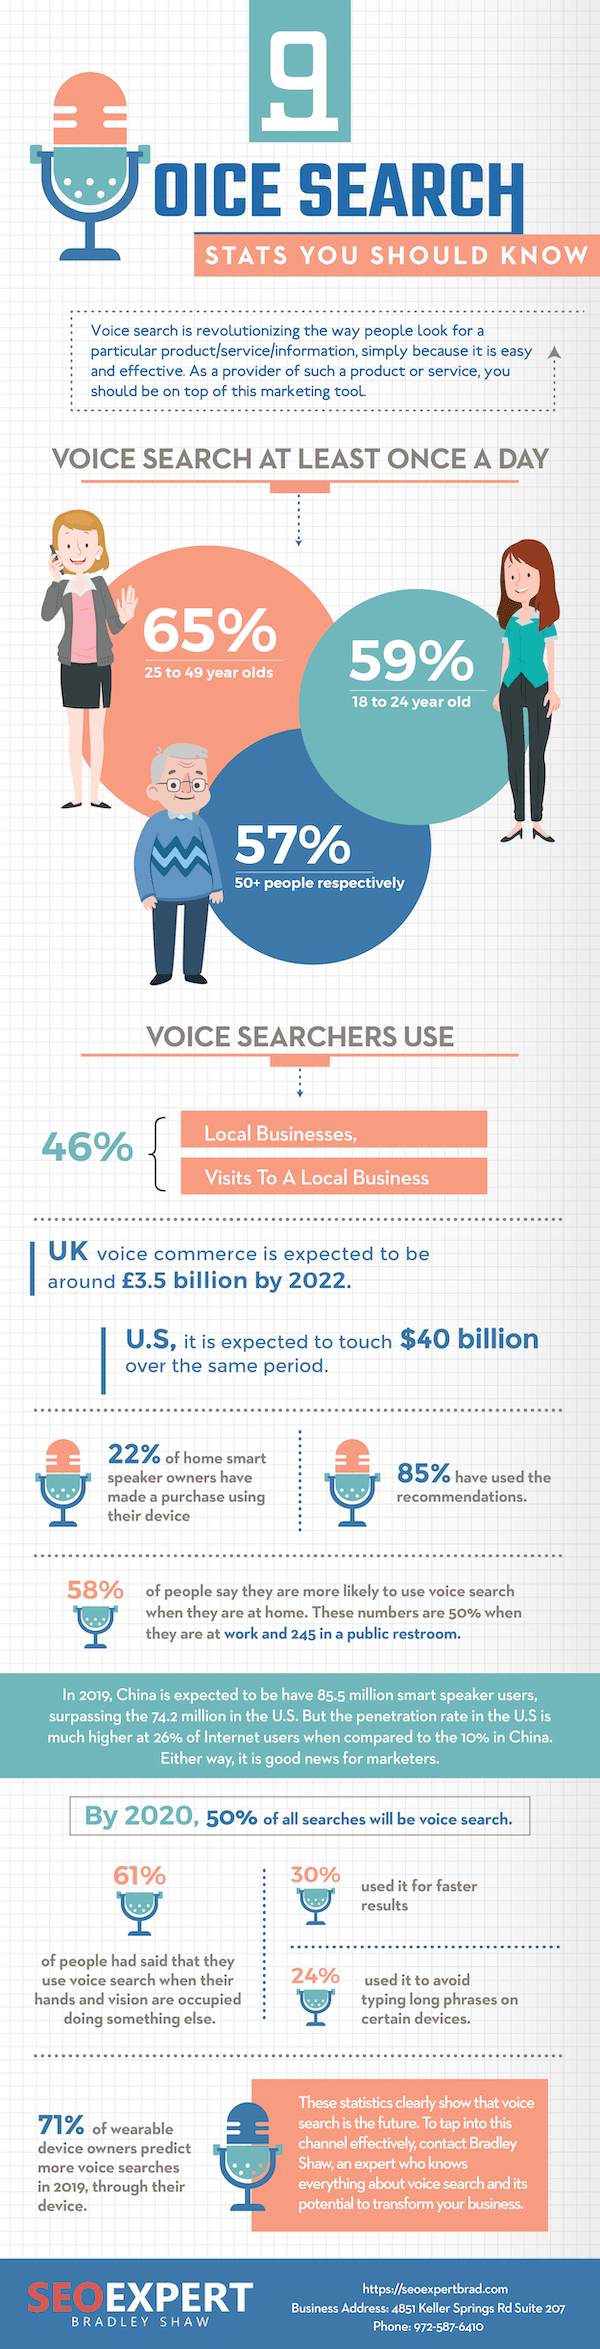 voice-search-statistics-med-min